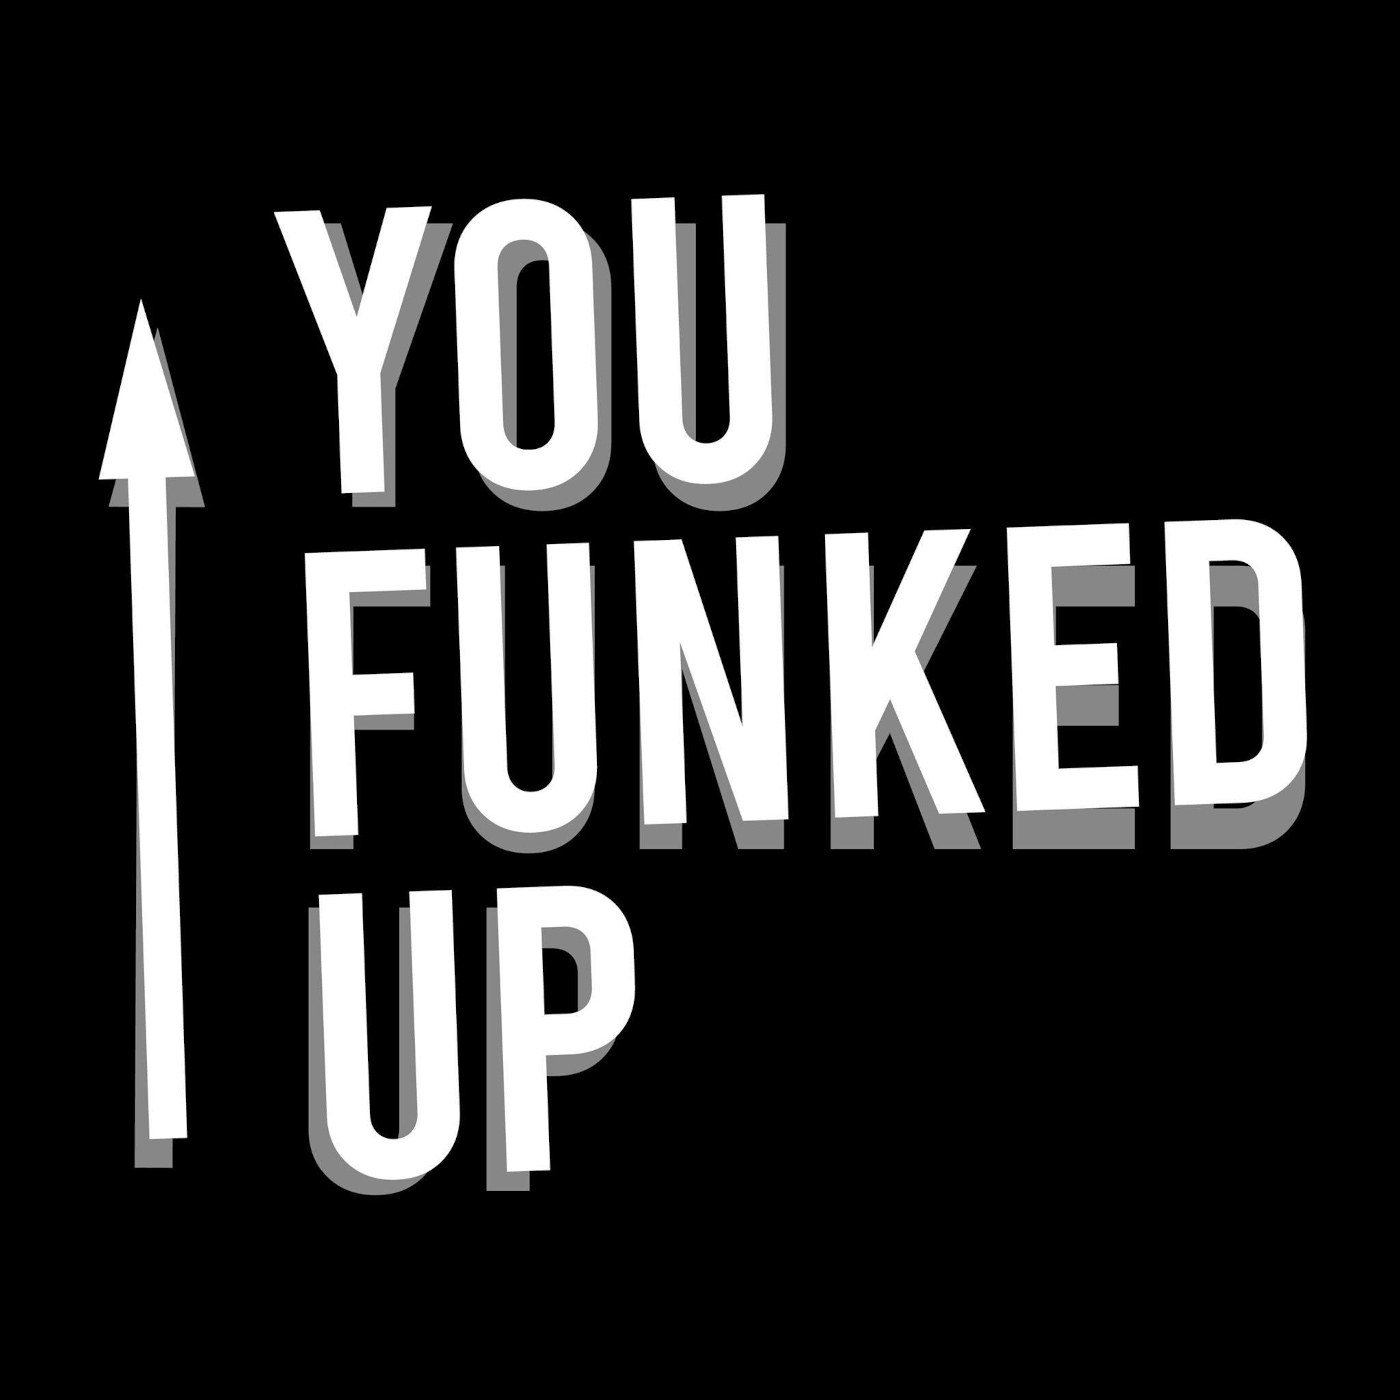 Funked up remix. Картинка Funked up. Funked up. Funked up обложка xxanteria. Funked up ntlxsq?.